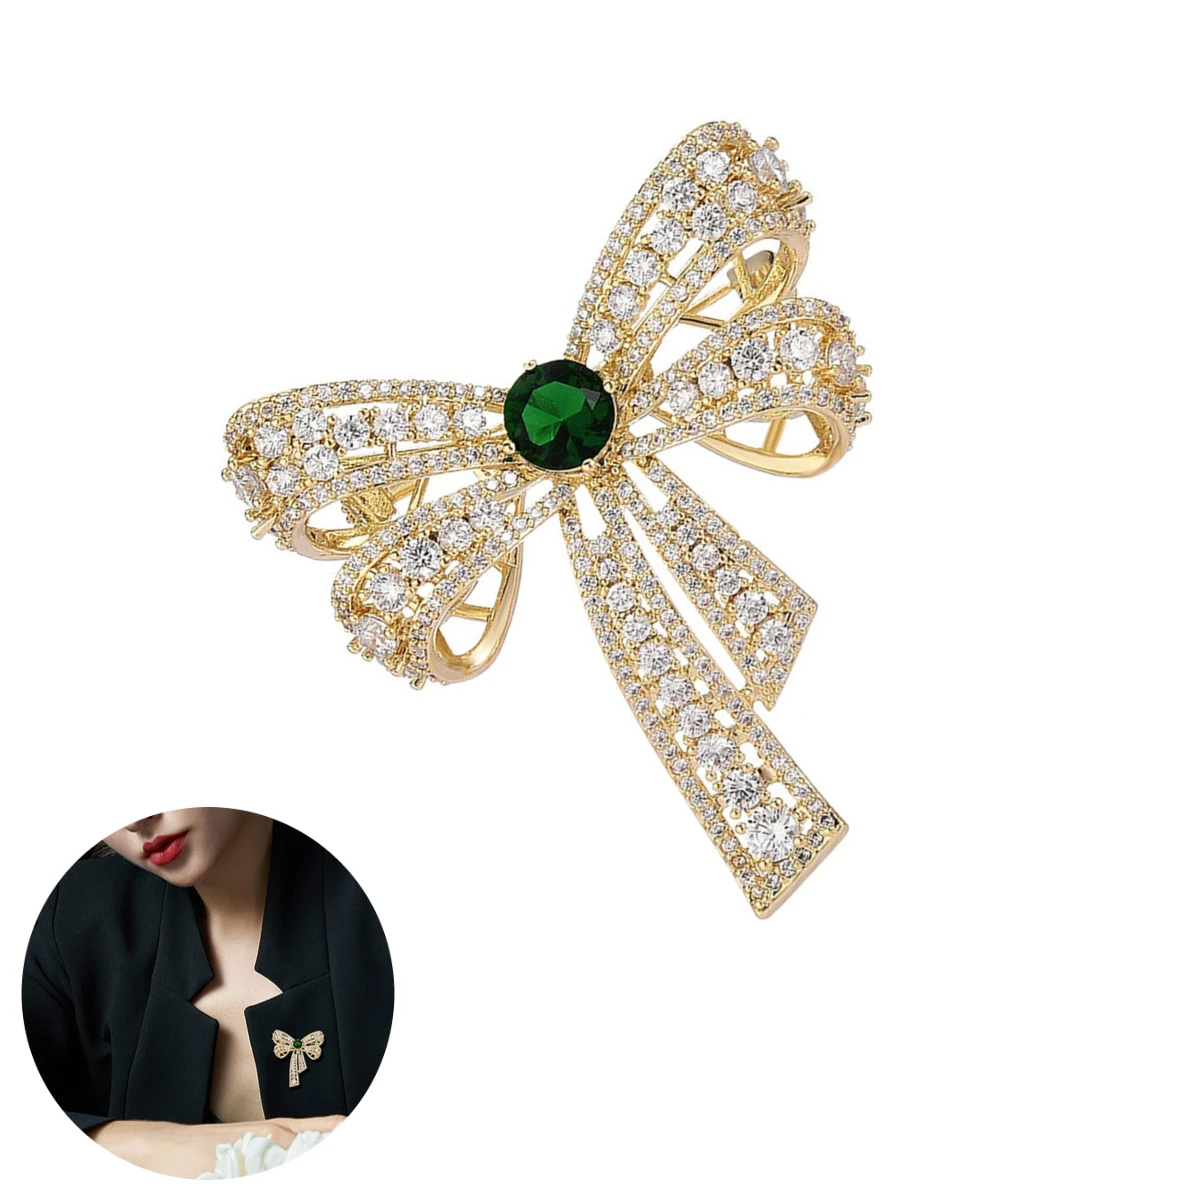 

Vintage Gold Tone Bow Brooch Women Simple Green Rhinestone Corsage Wedding Banquet Party Dress Clothing Accessories Broach Pin